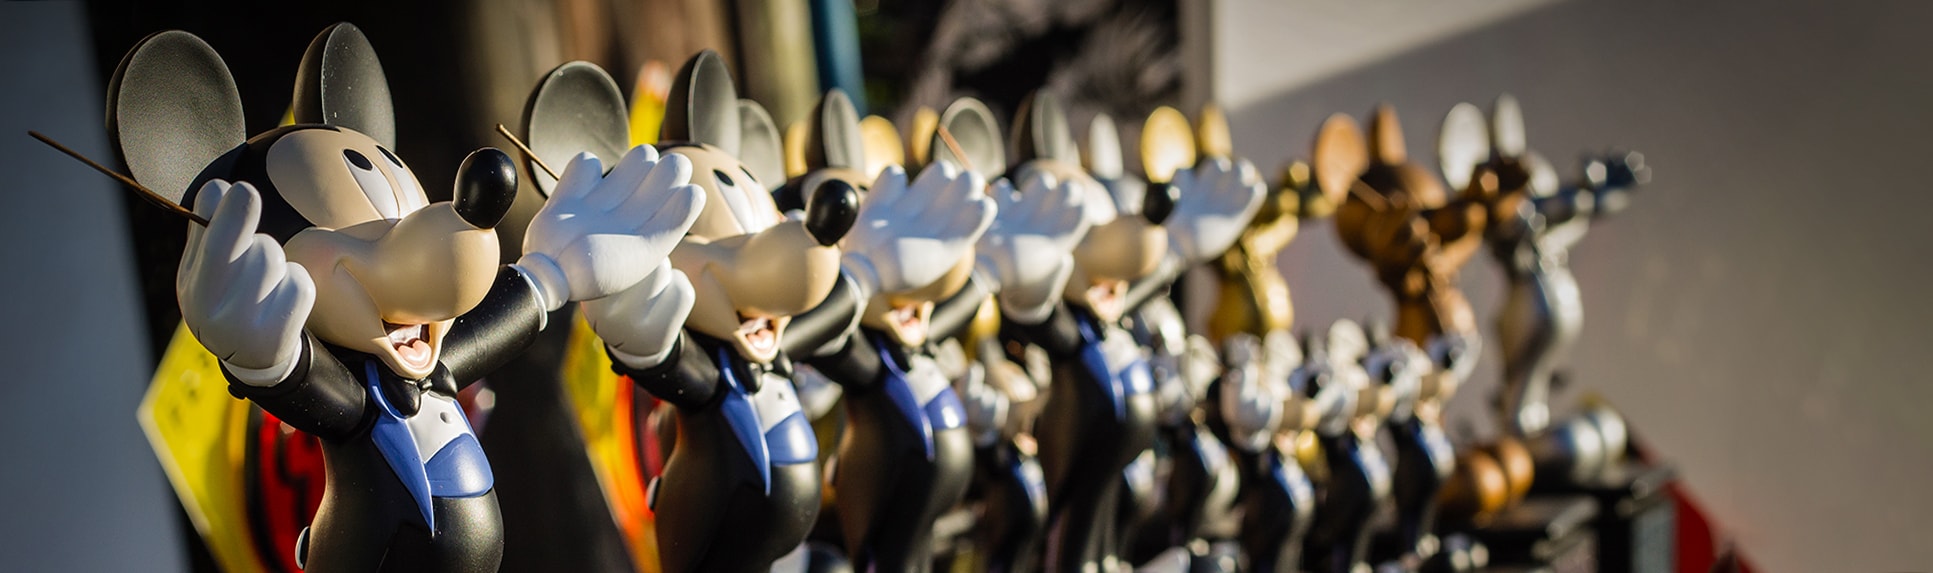 A row of Mickey Mouse statue awards